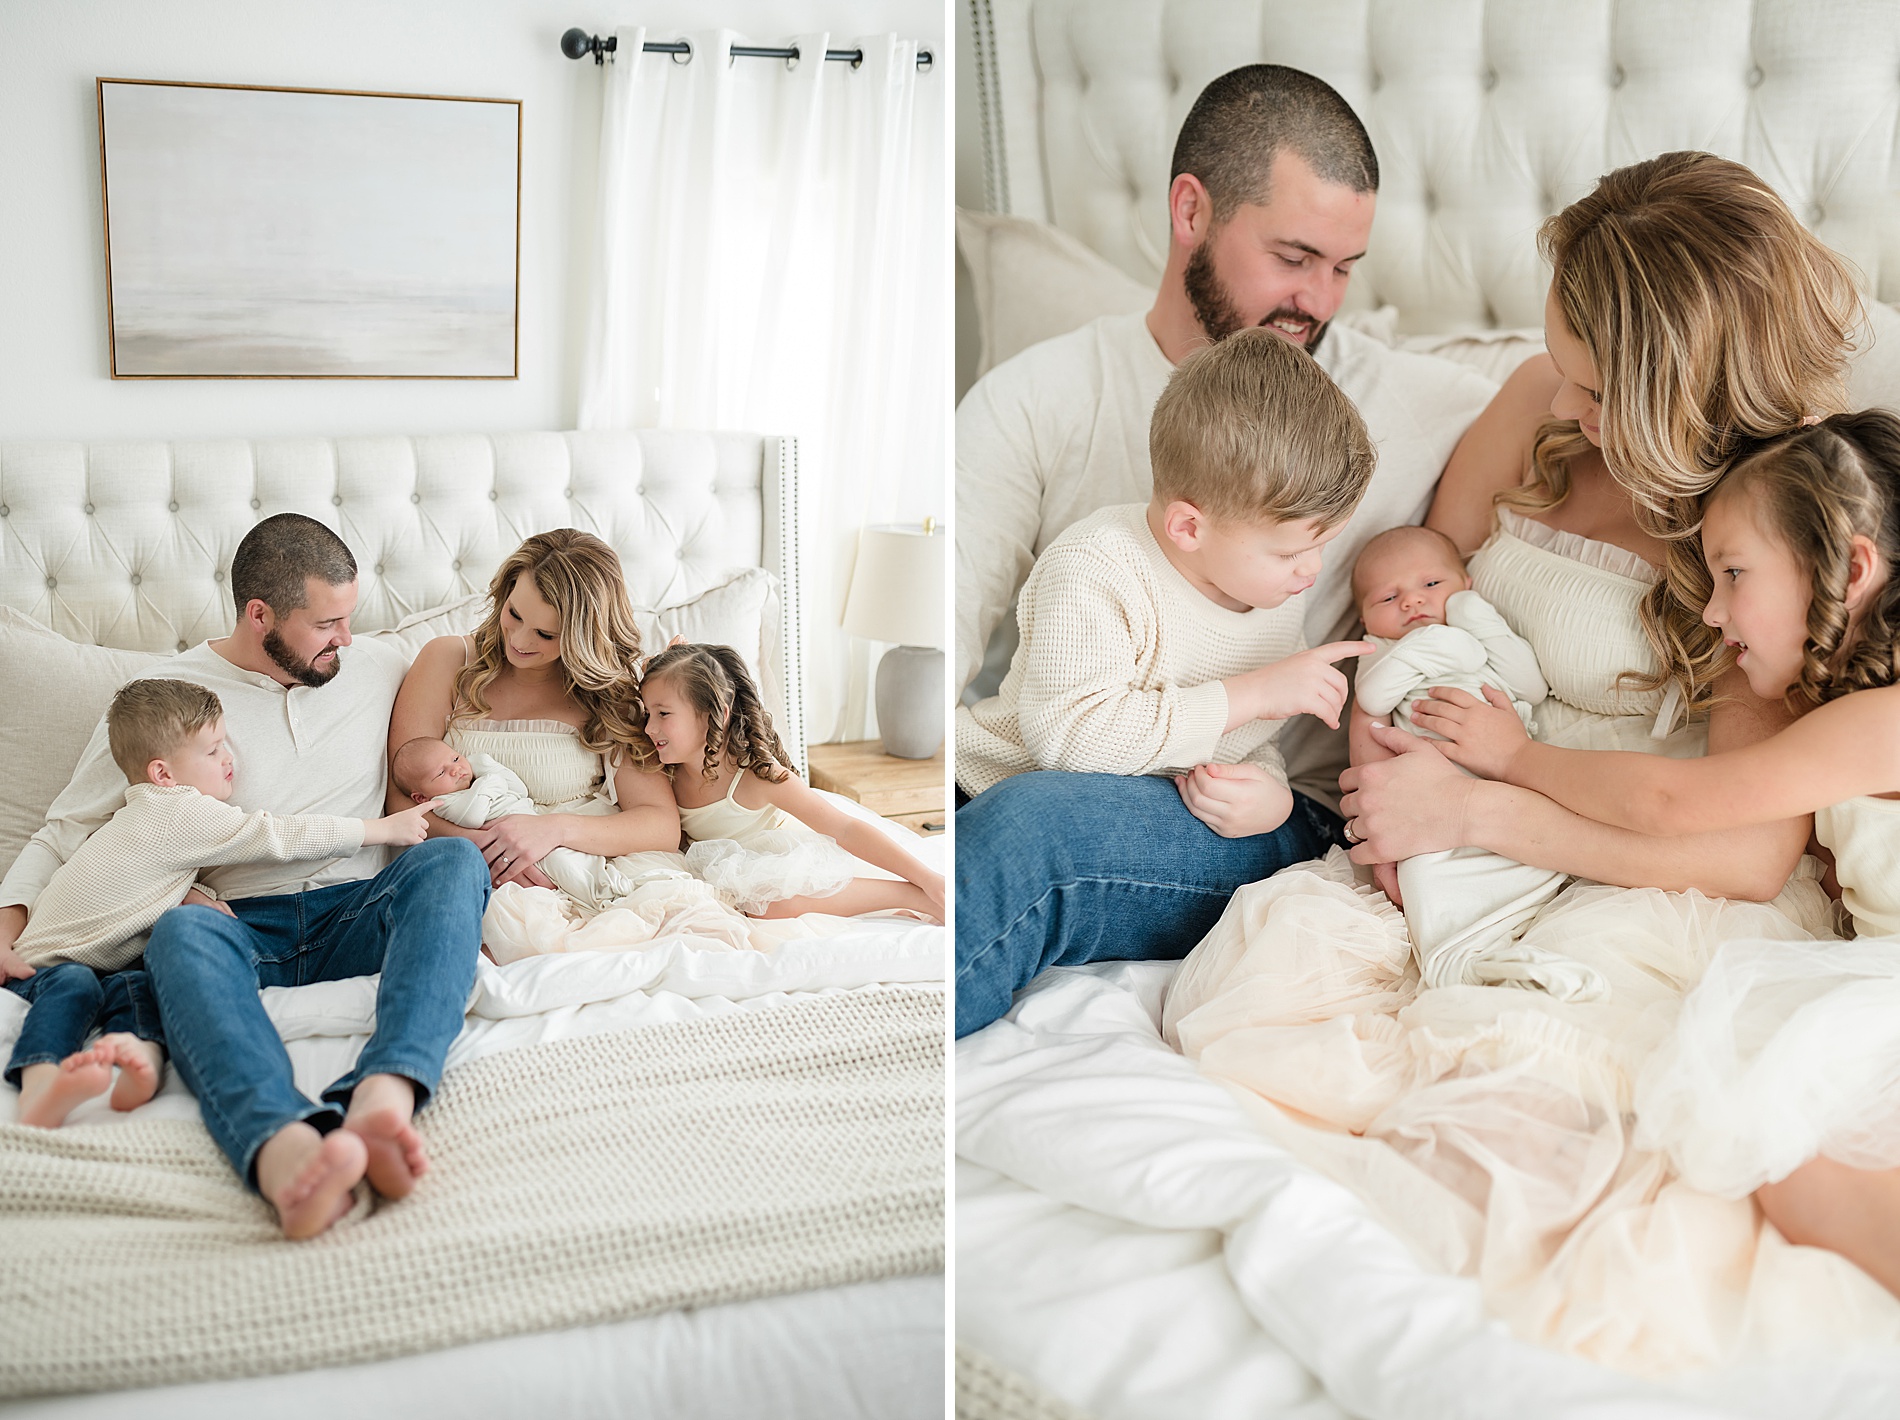 How to Prepare Siblings For Newborn Photos from candid family and newborn portraits taken by Lindsey Dutton Photography, a Dallas newborn photographer
